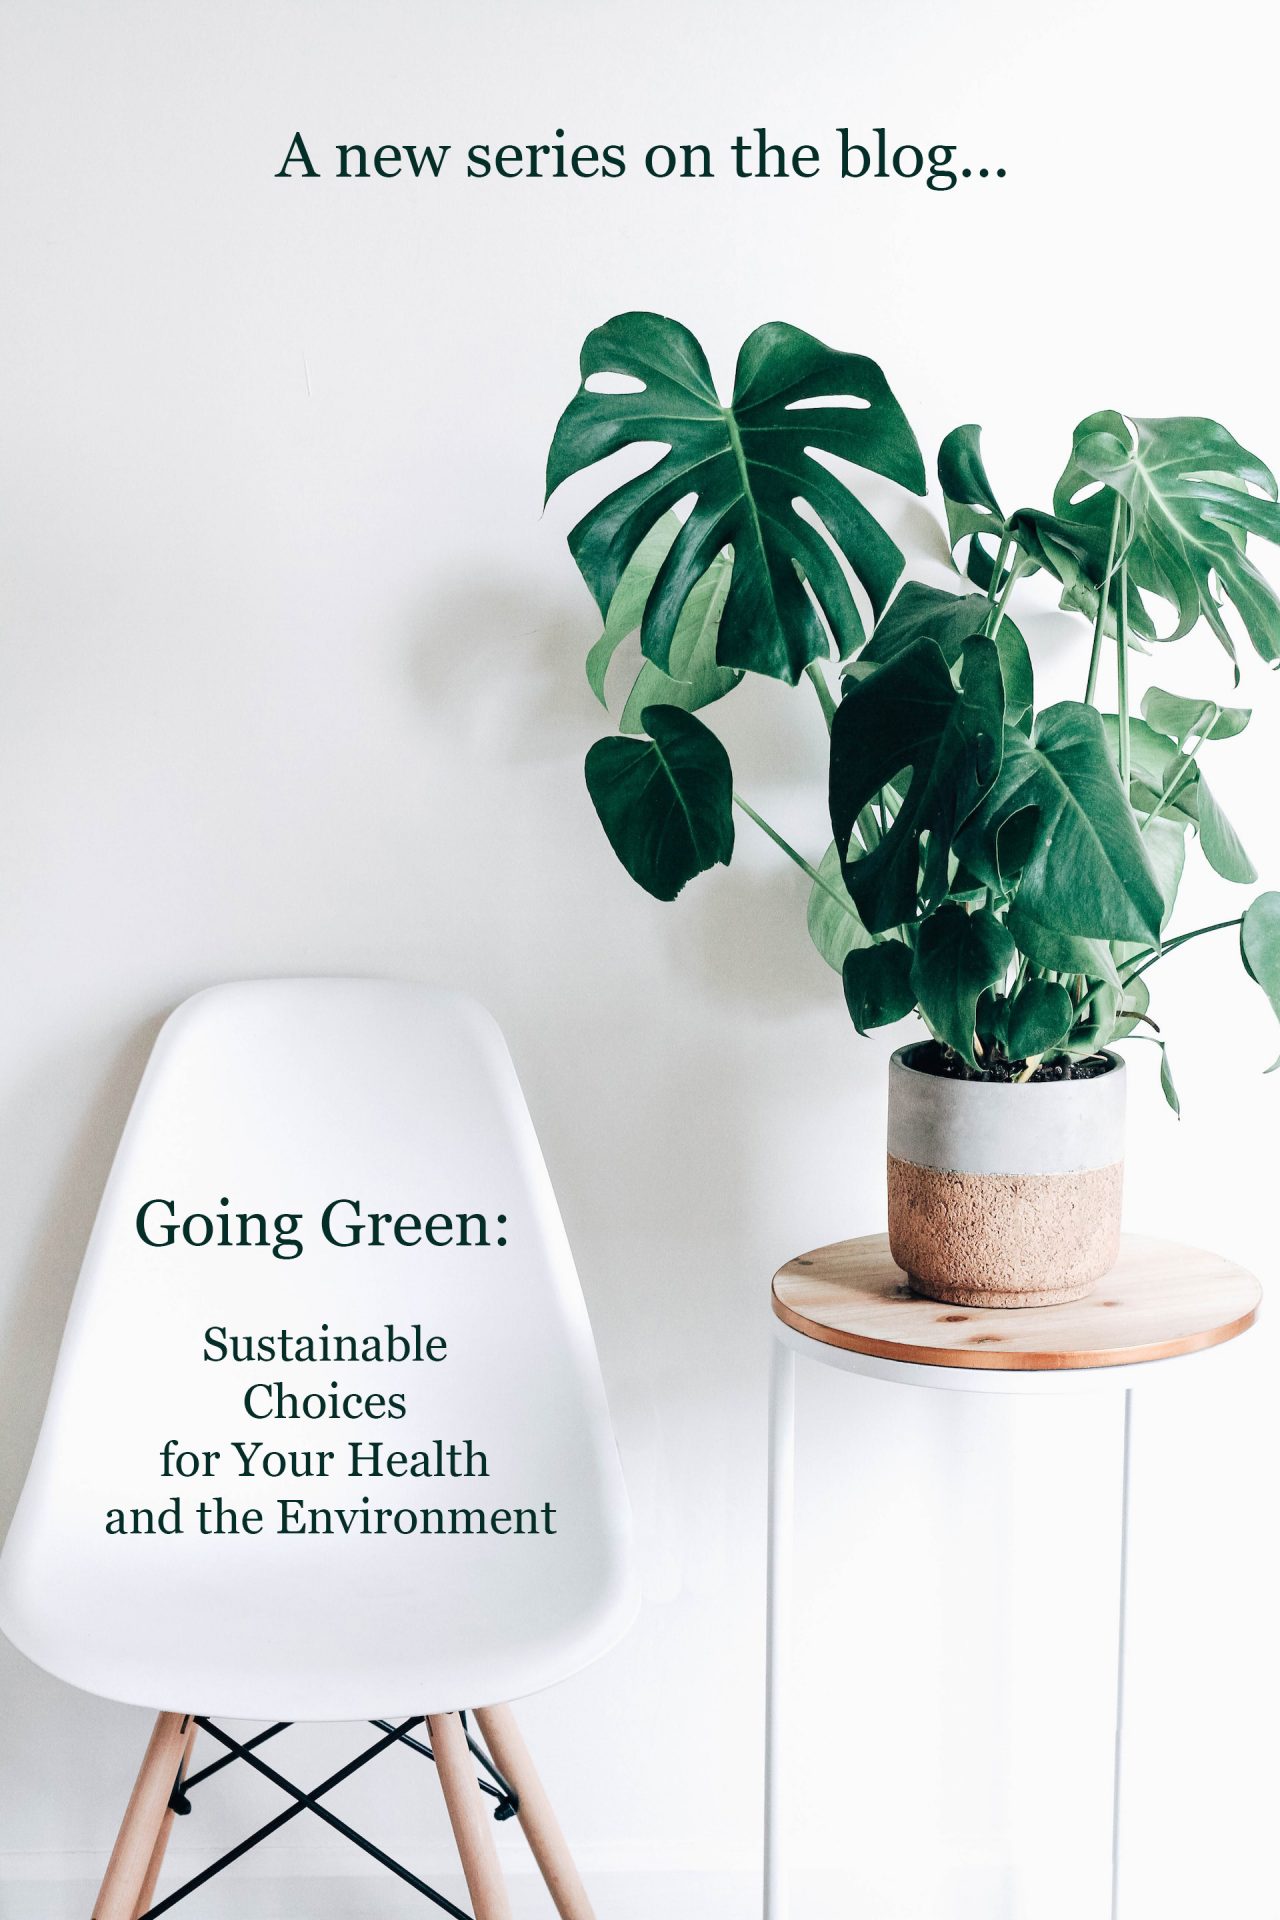 Going Green: Sustainable Choices for Your Health and the Environment